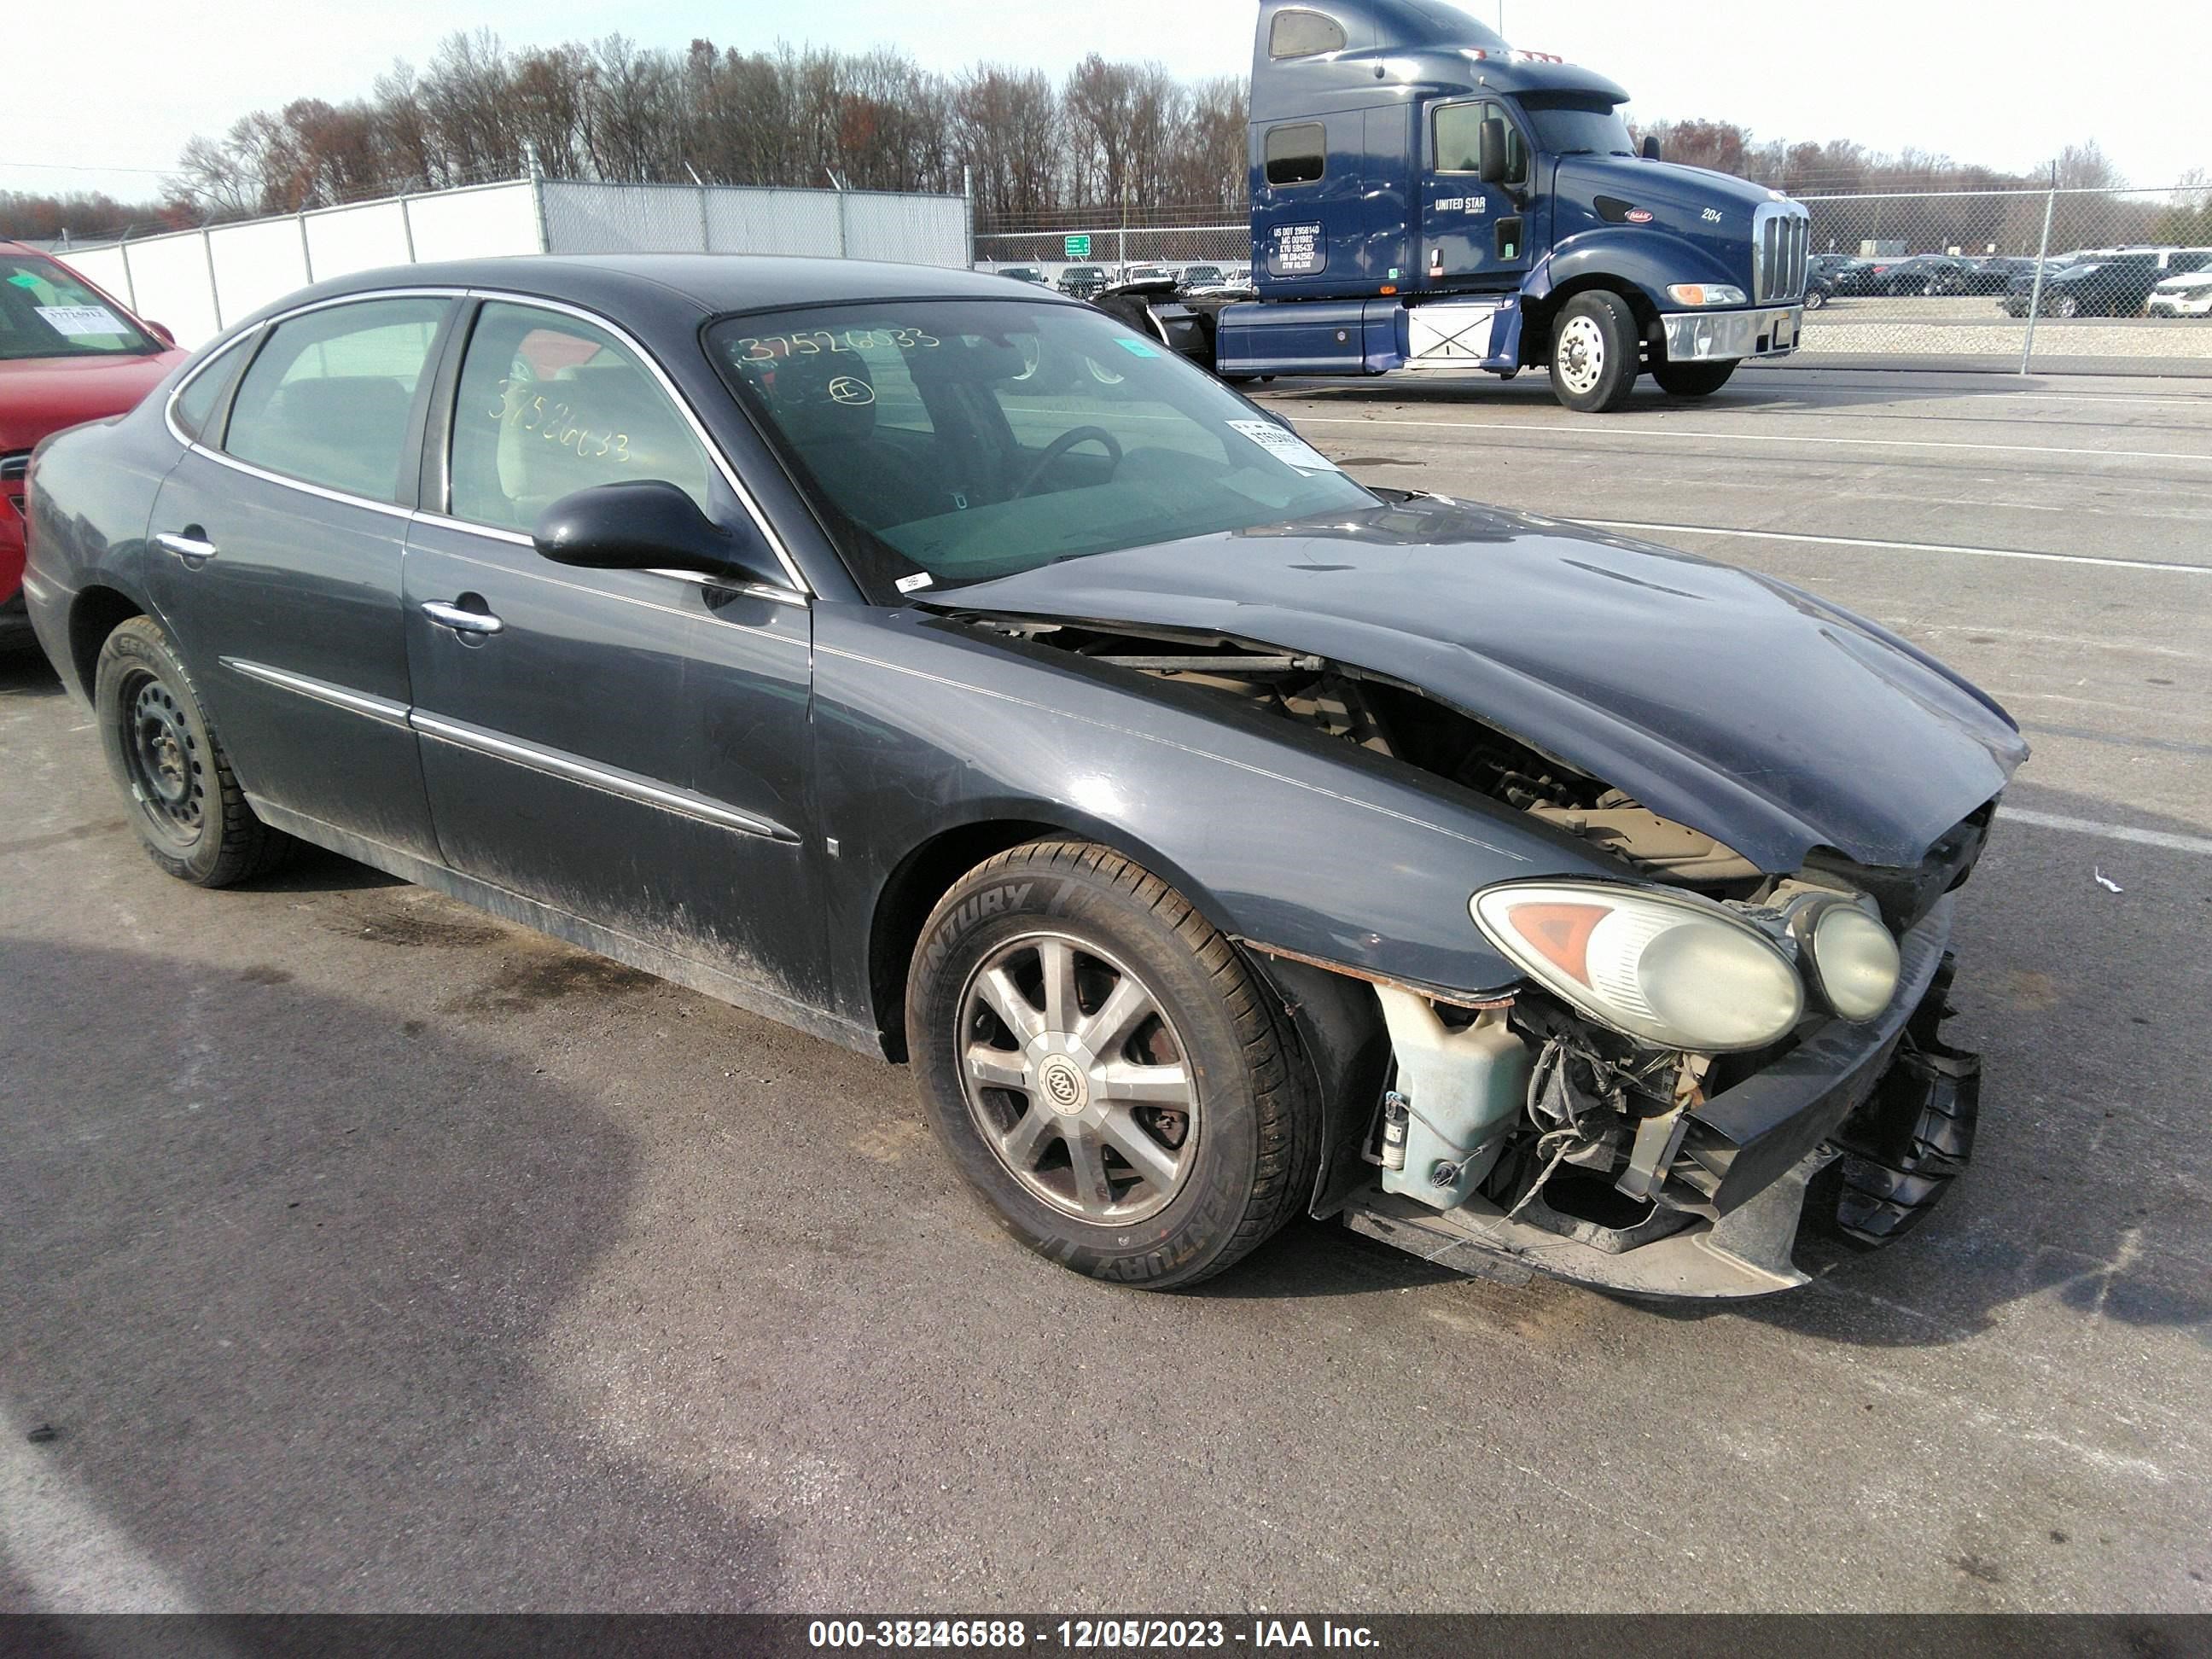 vin: 2G4WC582891103314 2G4WC582891103314 2009 buick lacrosse 3800 for Sale in 46217, 3302 S Harding St, Indianapolis, USA